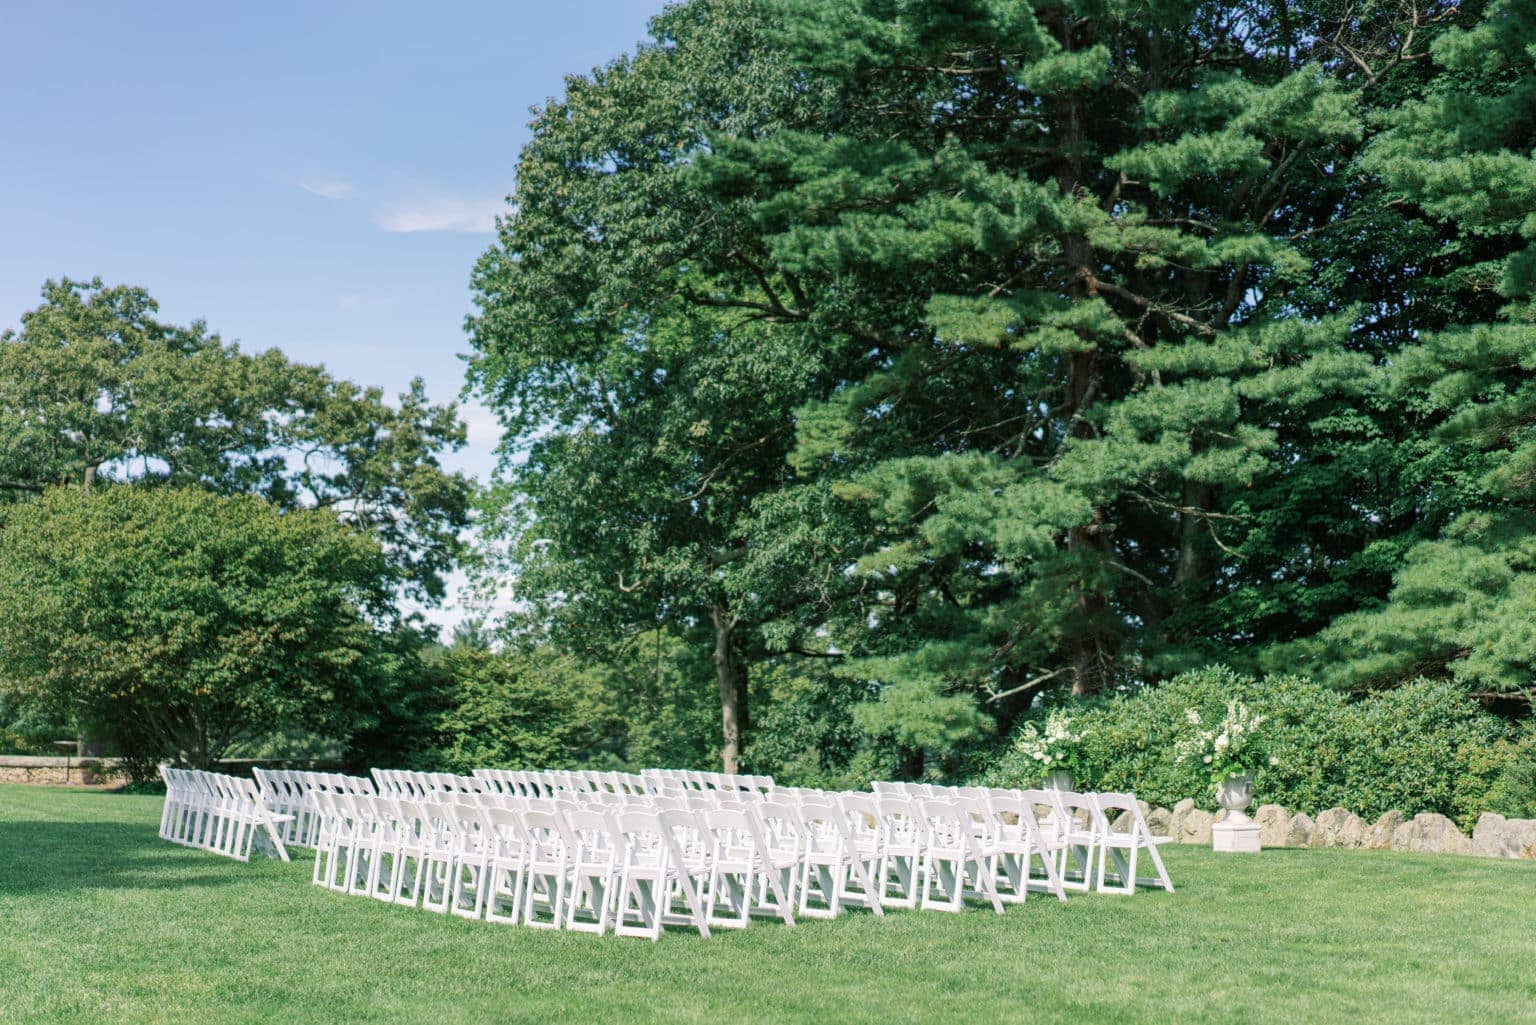 Complete Guide for Planning the Quintessential New England Wedding: The beautiful outdoor set-up of a New England wedding ceremony.